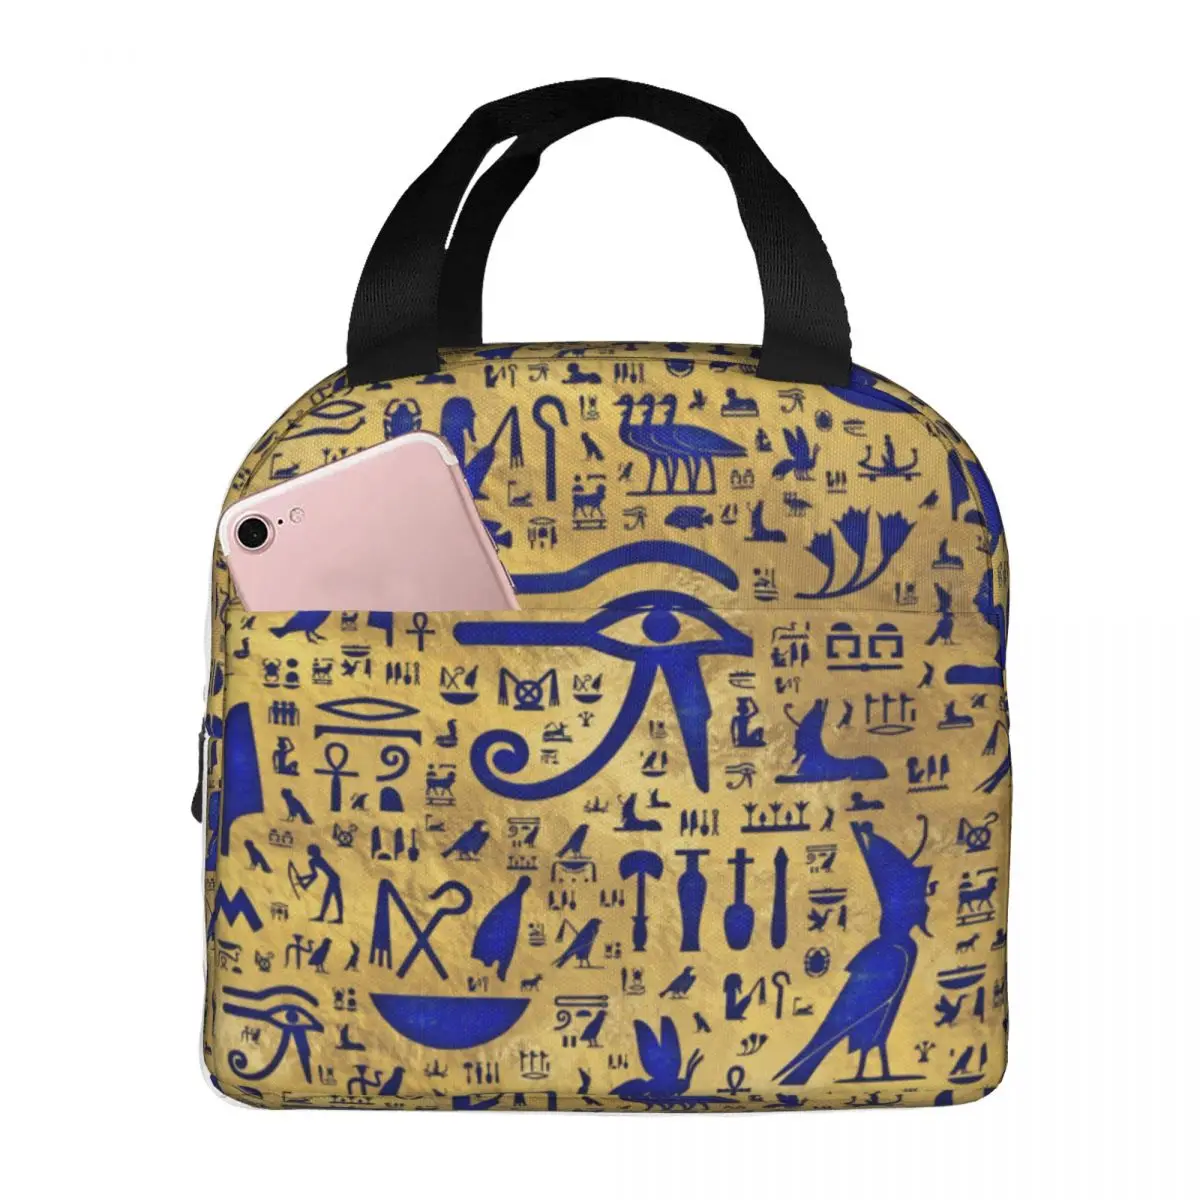 Egyptian Hieroglyphic Lunch Bag Portable Insulated Cooler Bag Egypt Pharaoh Thermal Cold Food Picnic Lunch Box for Women Kids